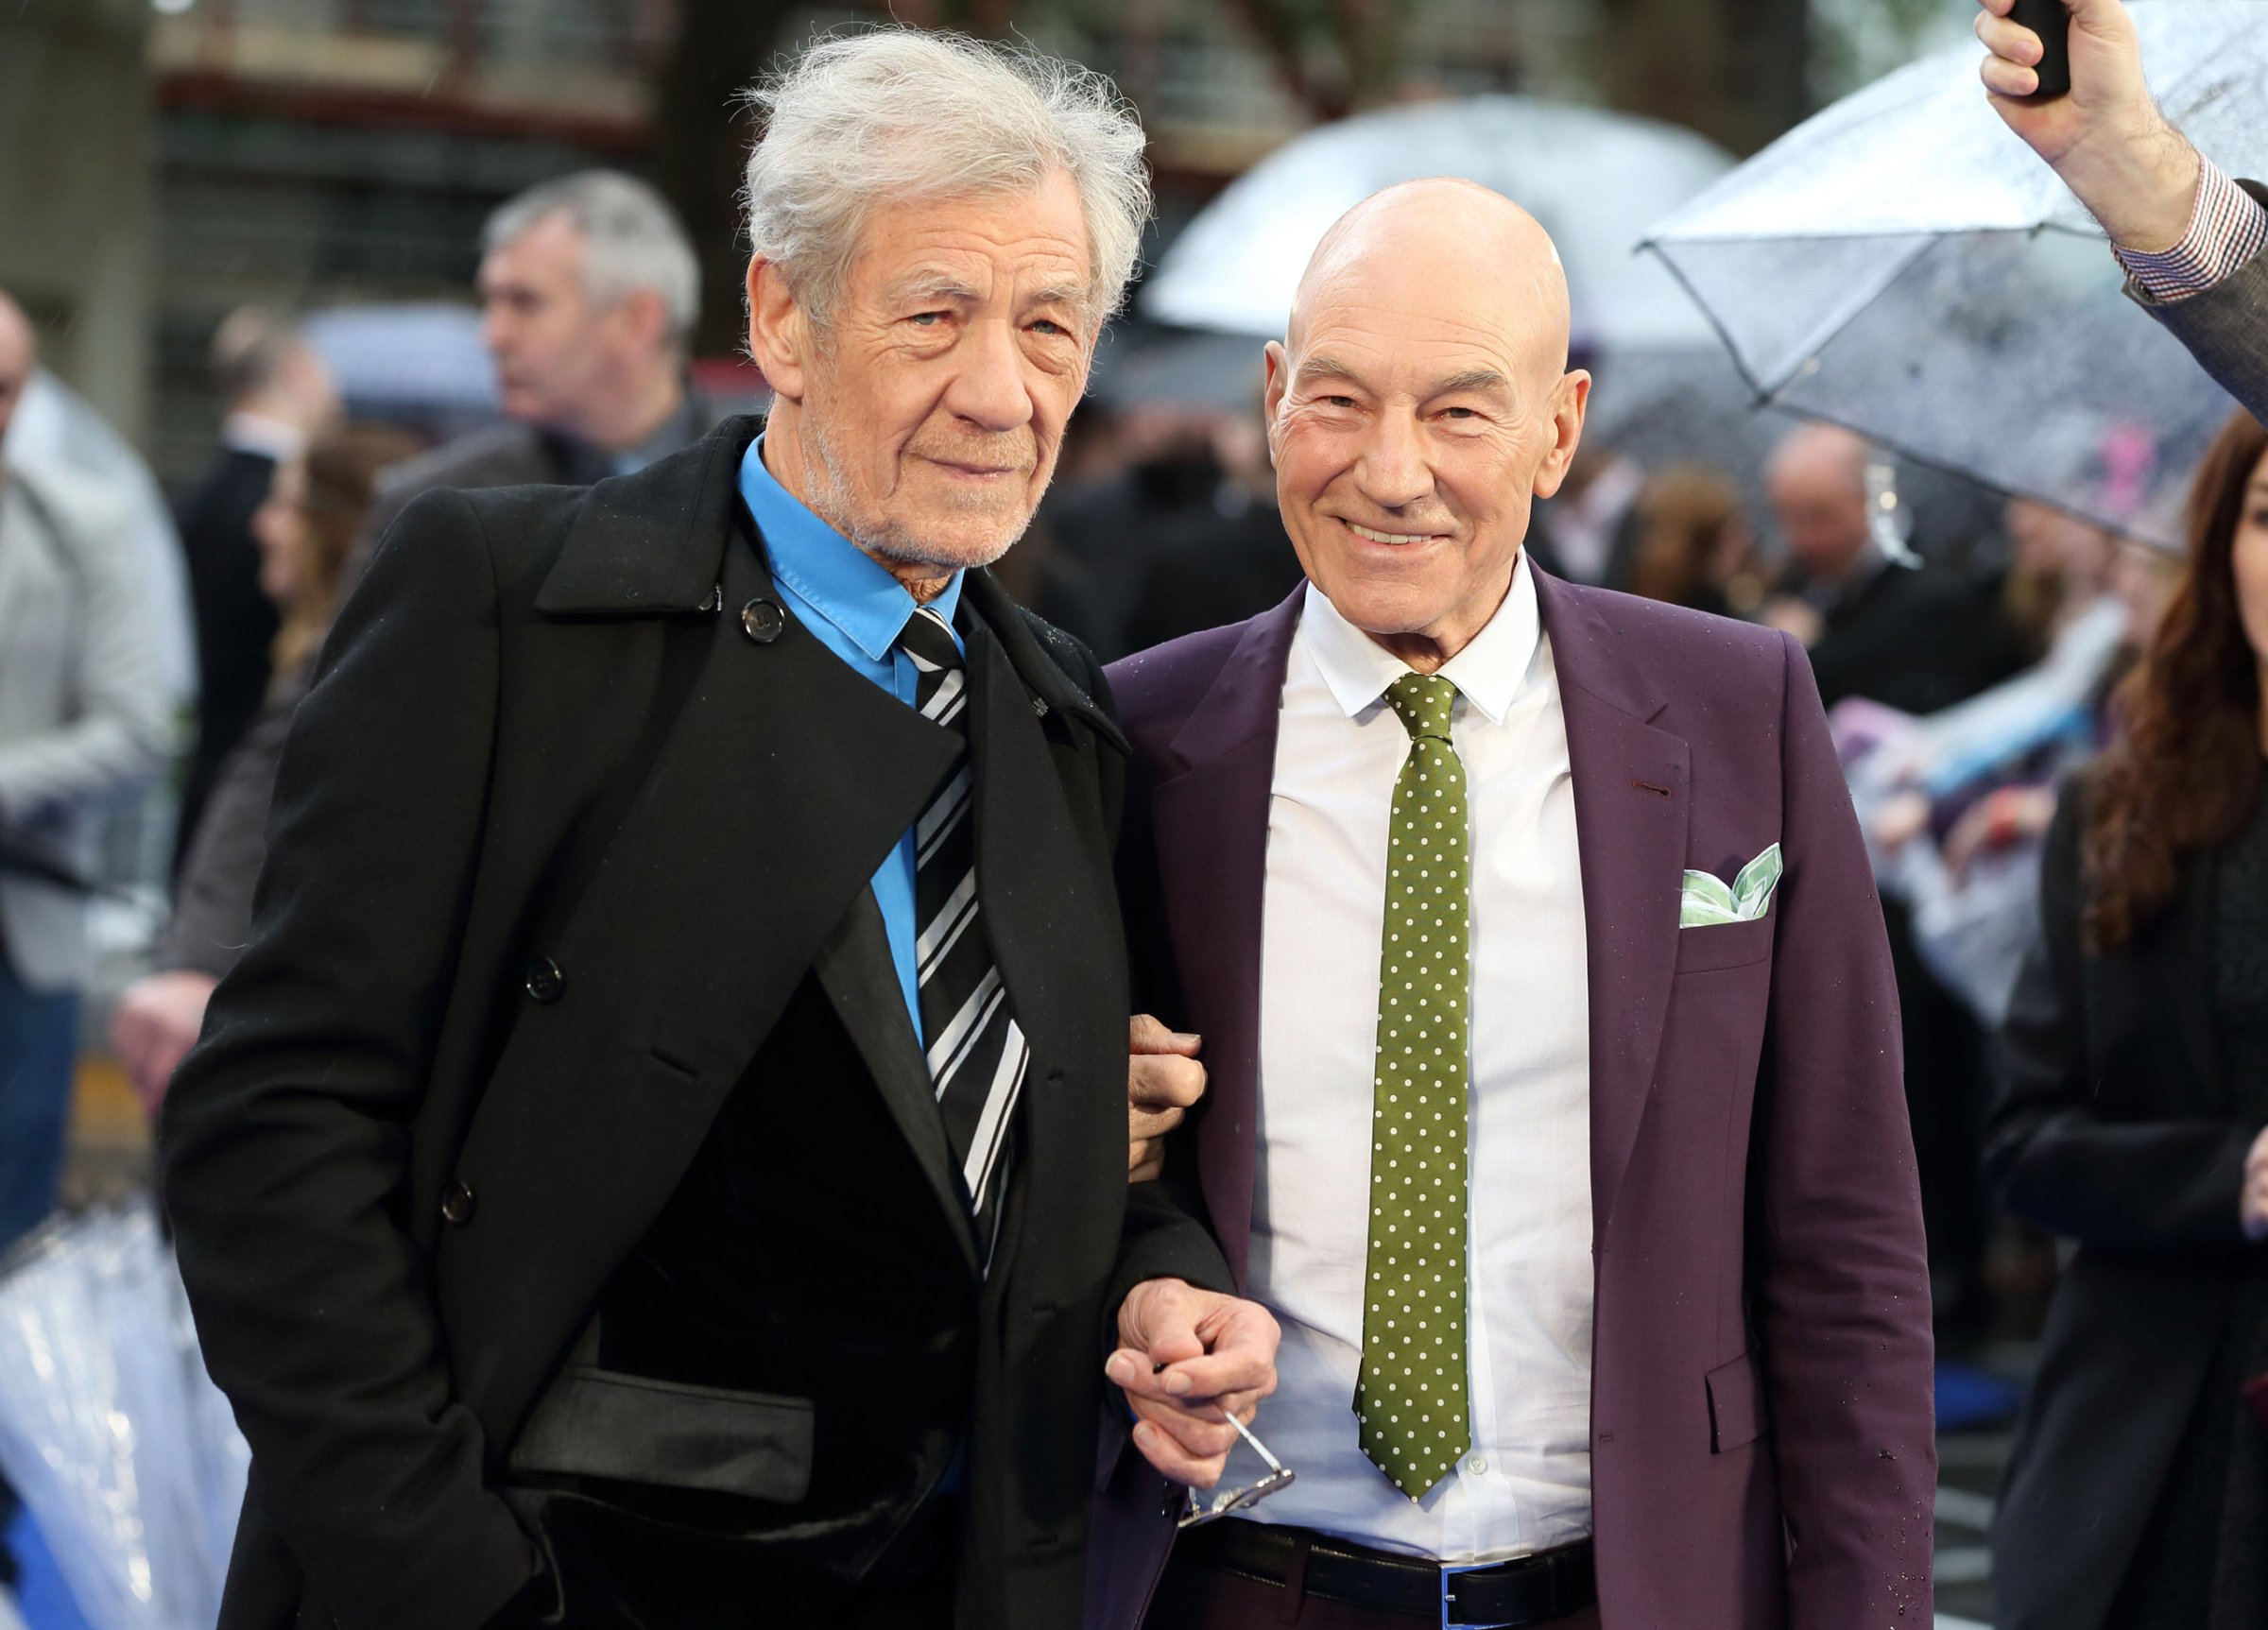 LONDON, ENGLAND - MAY 12: Sir Ian McKellen and Patrick Stewart attend the UK Premiere of "X-Men: Days of Future Past" at Odeon Leicester Square on May 12, 2014 in London, England. (Photo by Mike Marsland/WireImage)